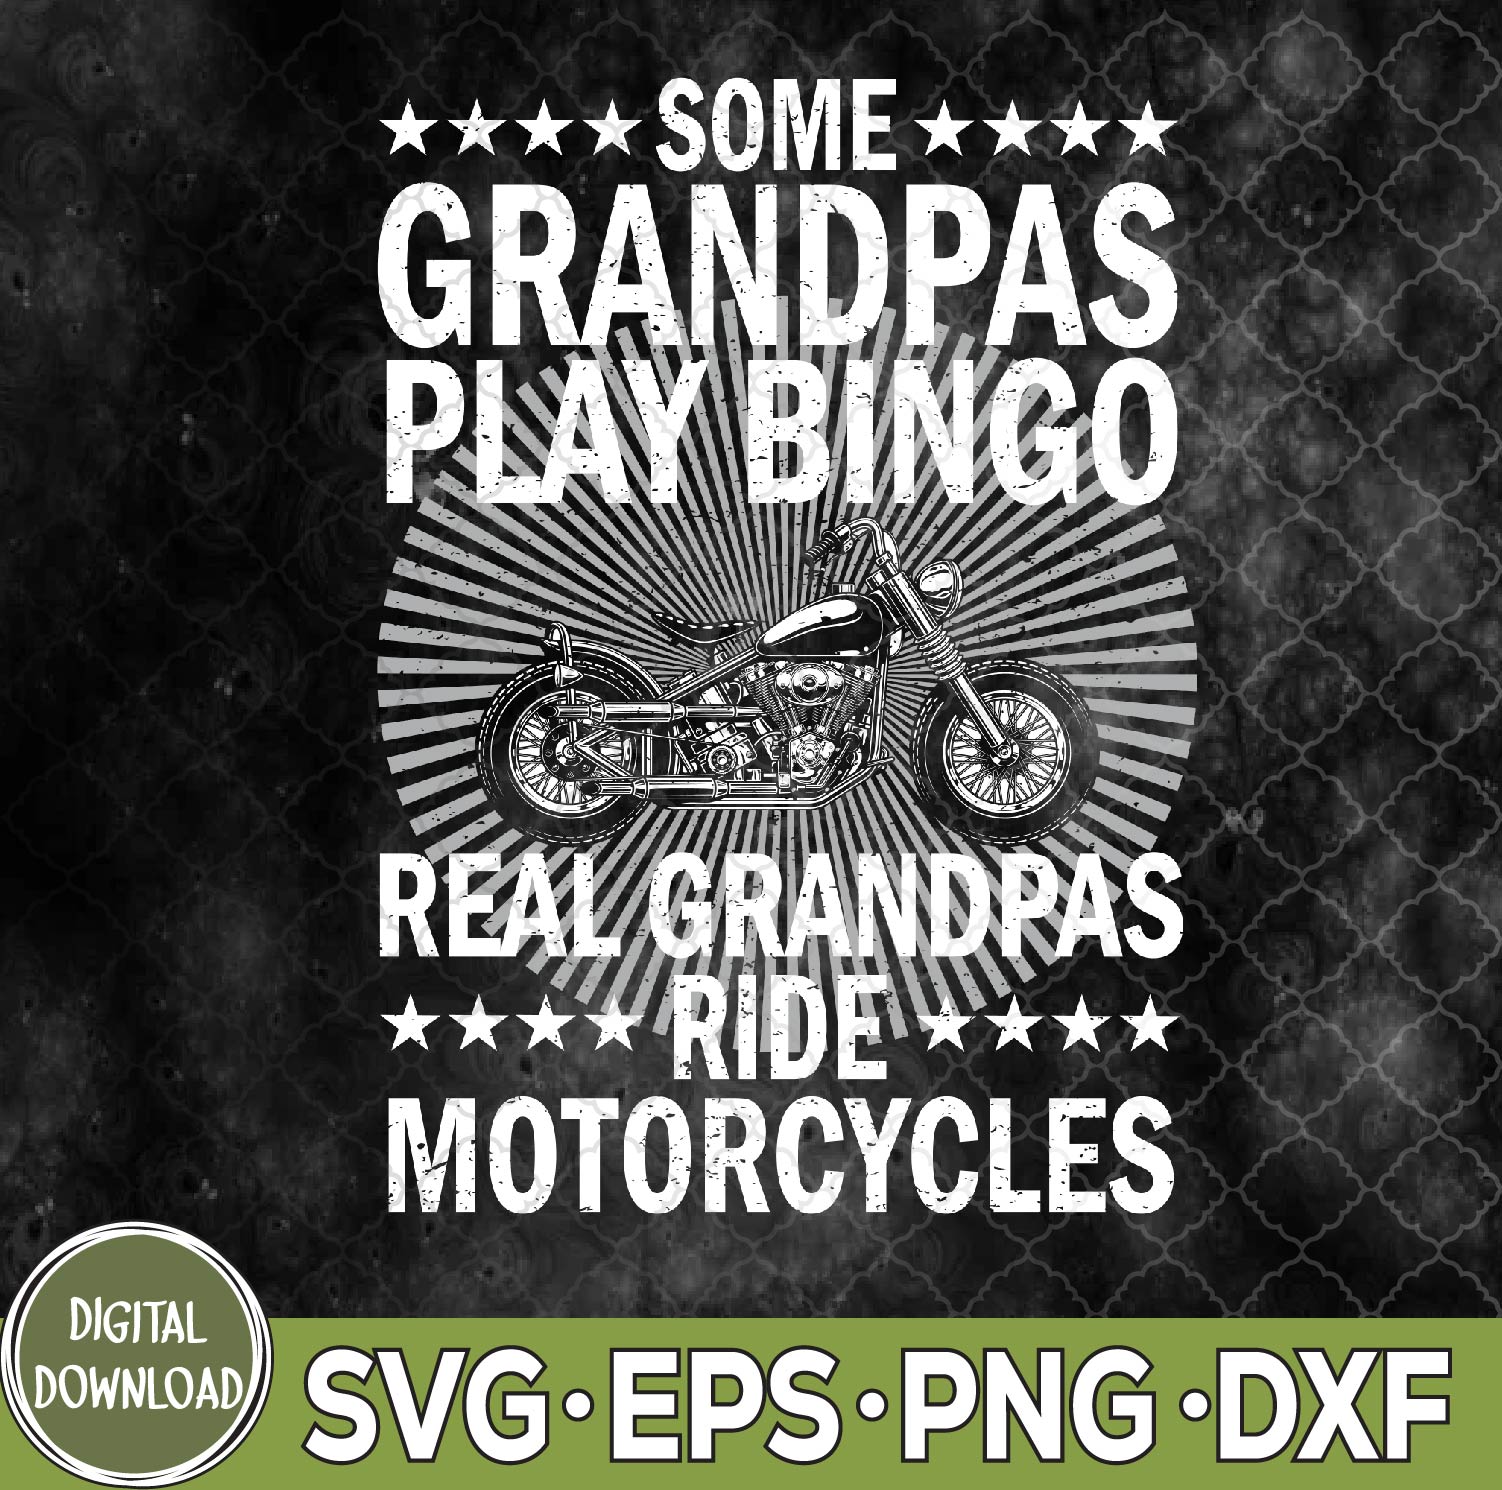 WTMNEW9file 09 130 Motorcycle Design For Grandpa Men Biking Motorcycle Lover svg, Motorcycle svg, Biking Motorcycle Svg, Eps, Png, Dxf